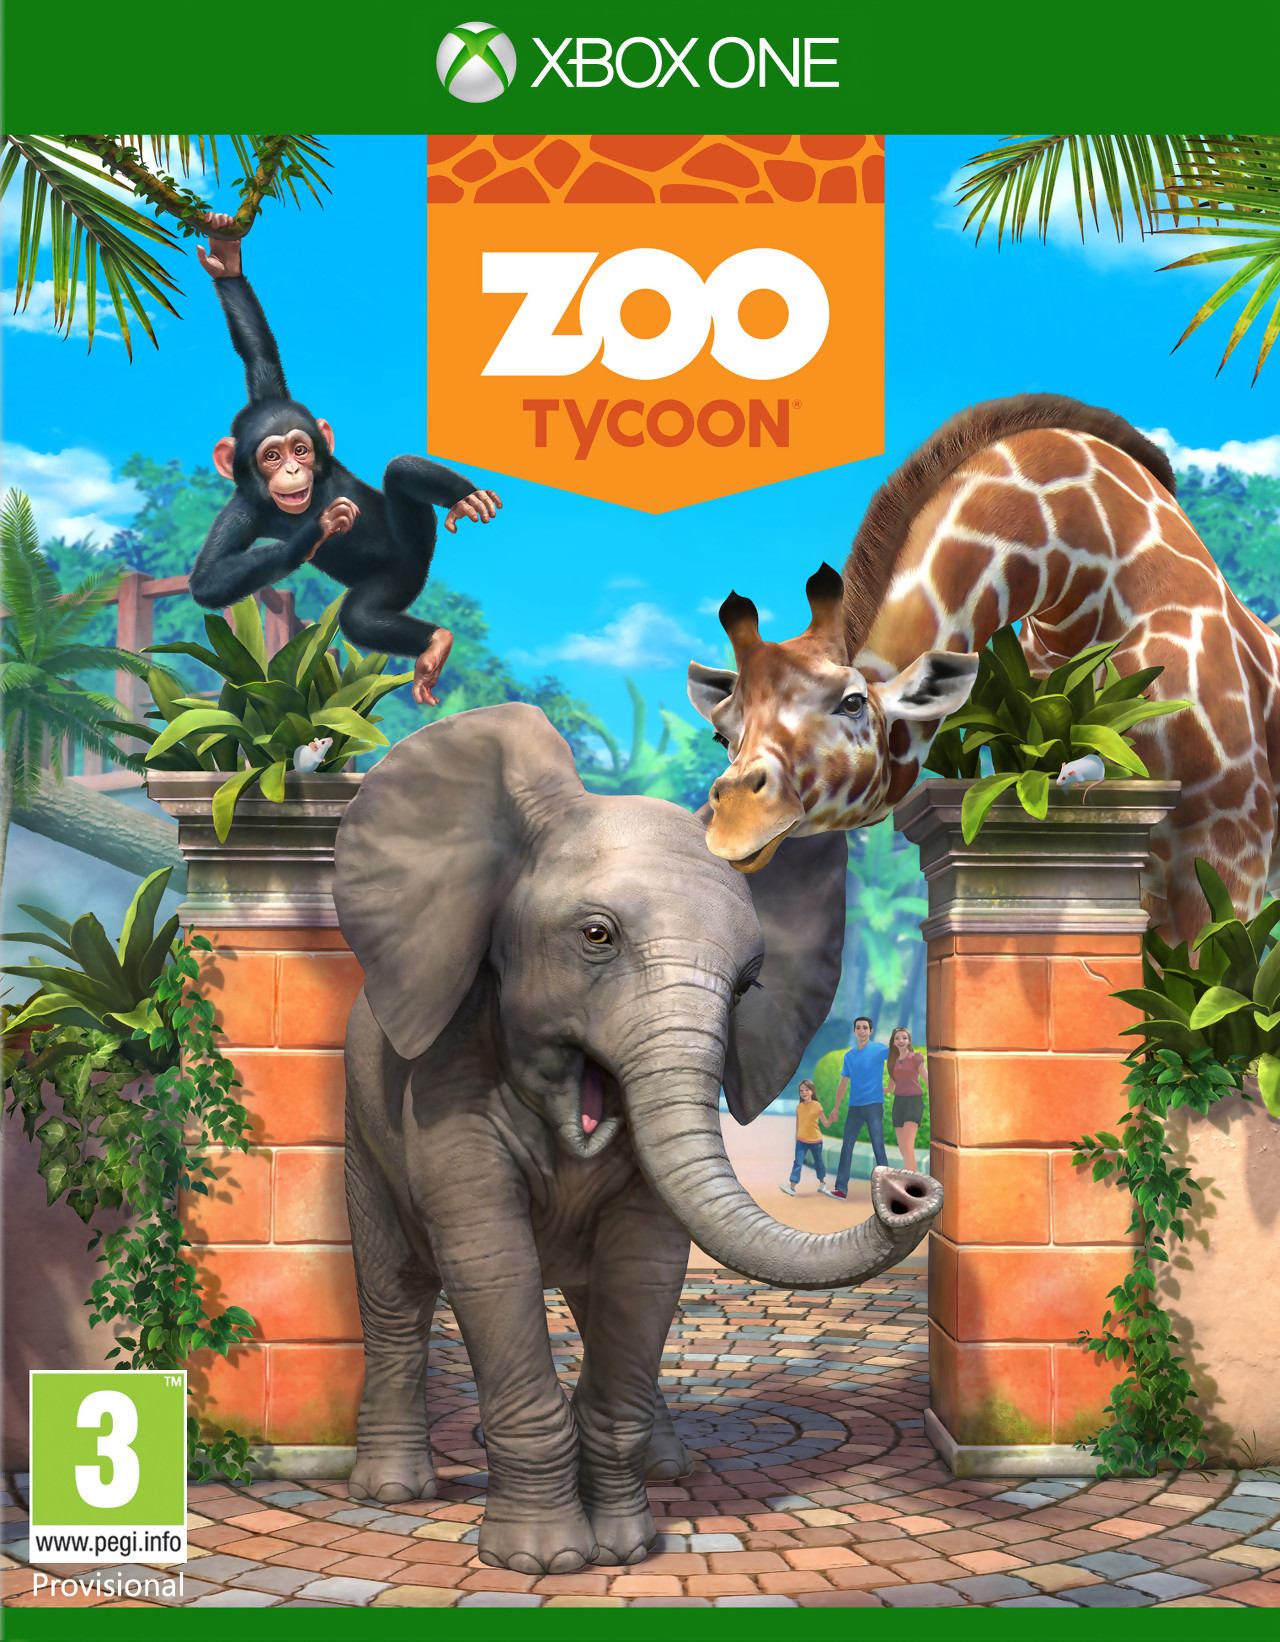 comment soigner animaux zoo tycoon xbox one